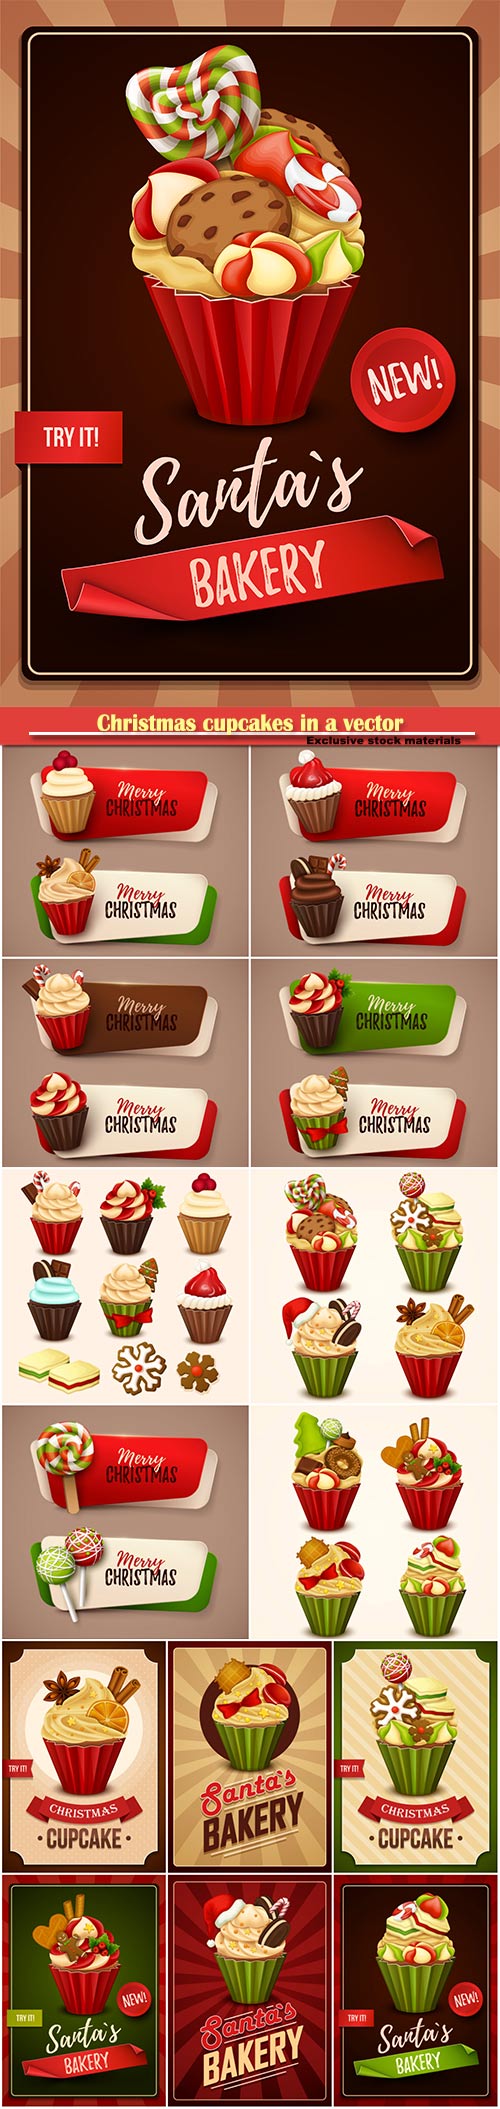 Christmas cupcakes in a vector, delicious sweets